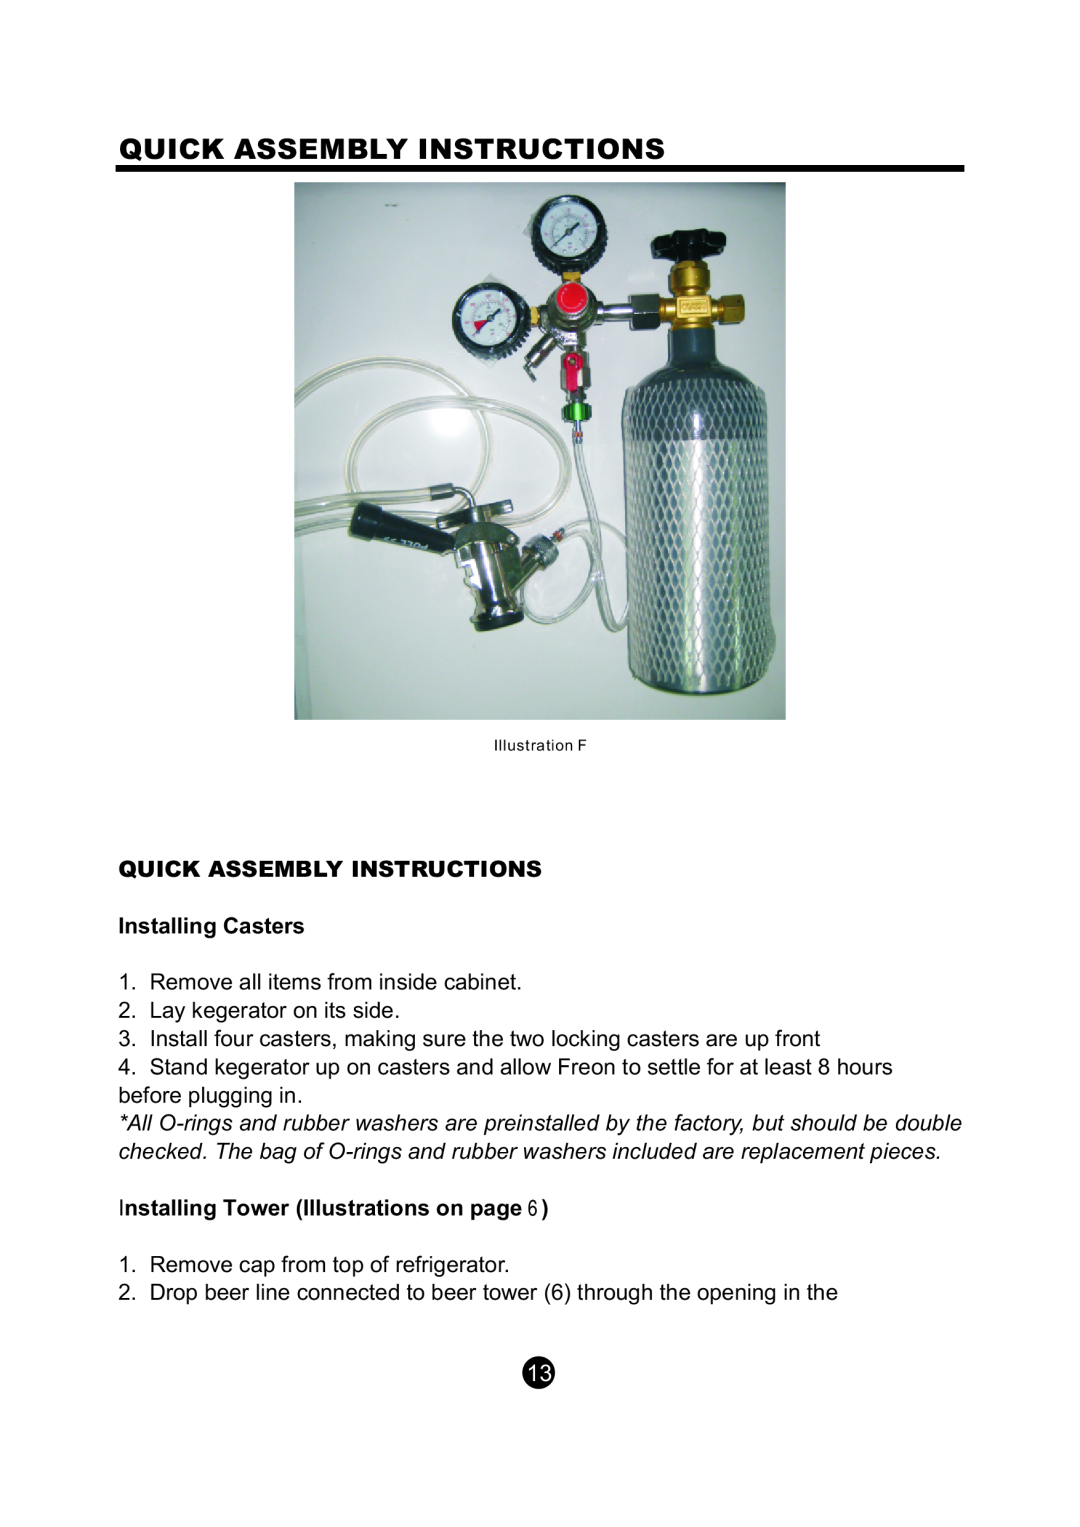 NewAir AK-200 owner manual Quick Assembly Instructions, QUICK ASSEMBLY INSTRUCTIONS Installing Casters 